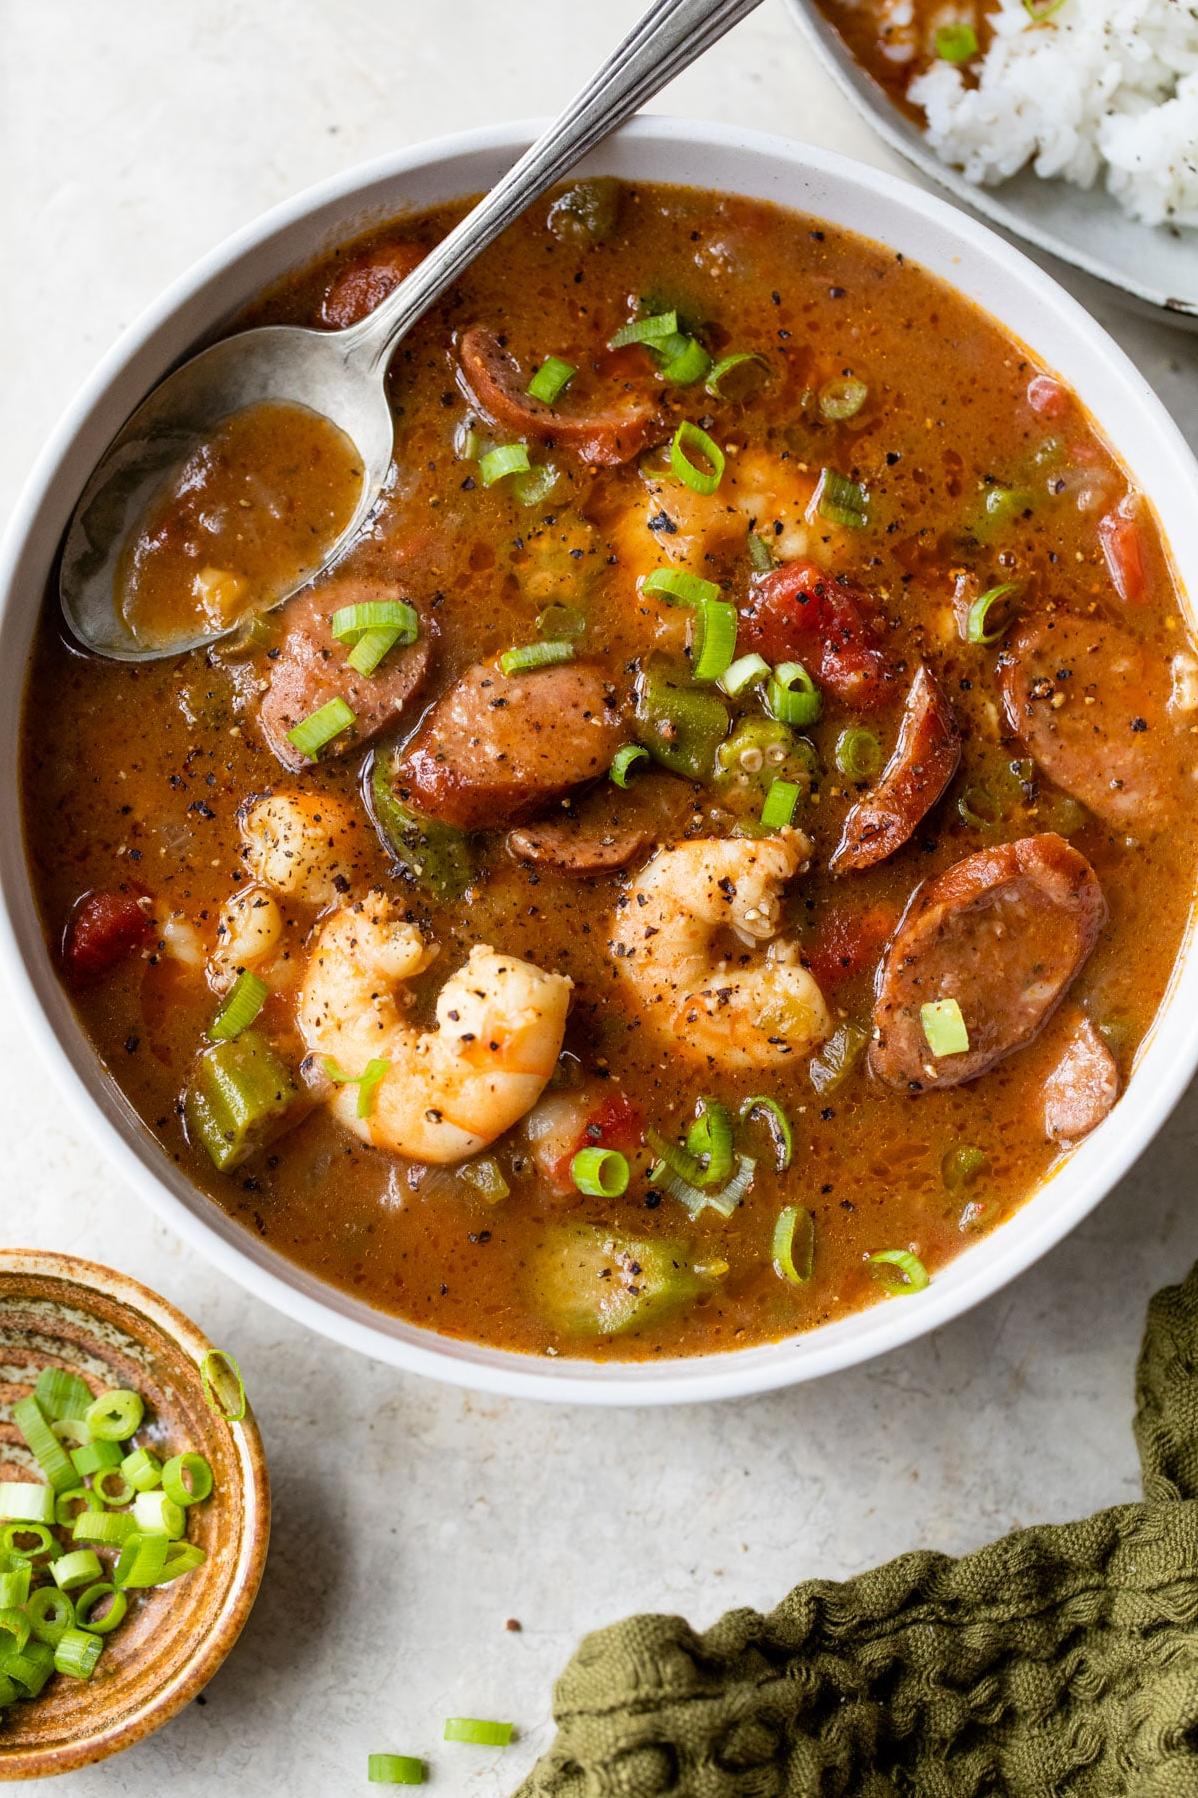  Kick off your heels and grab a spoon, this gumbo is meant to be savored.